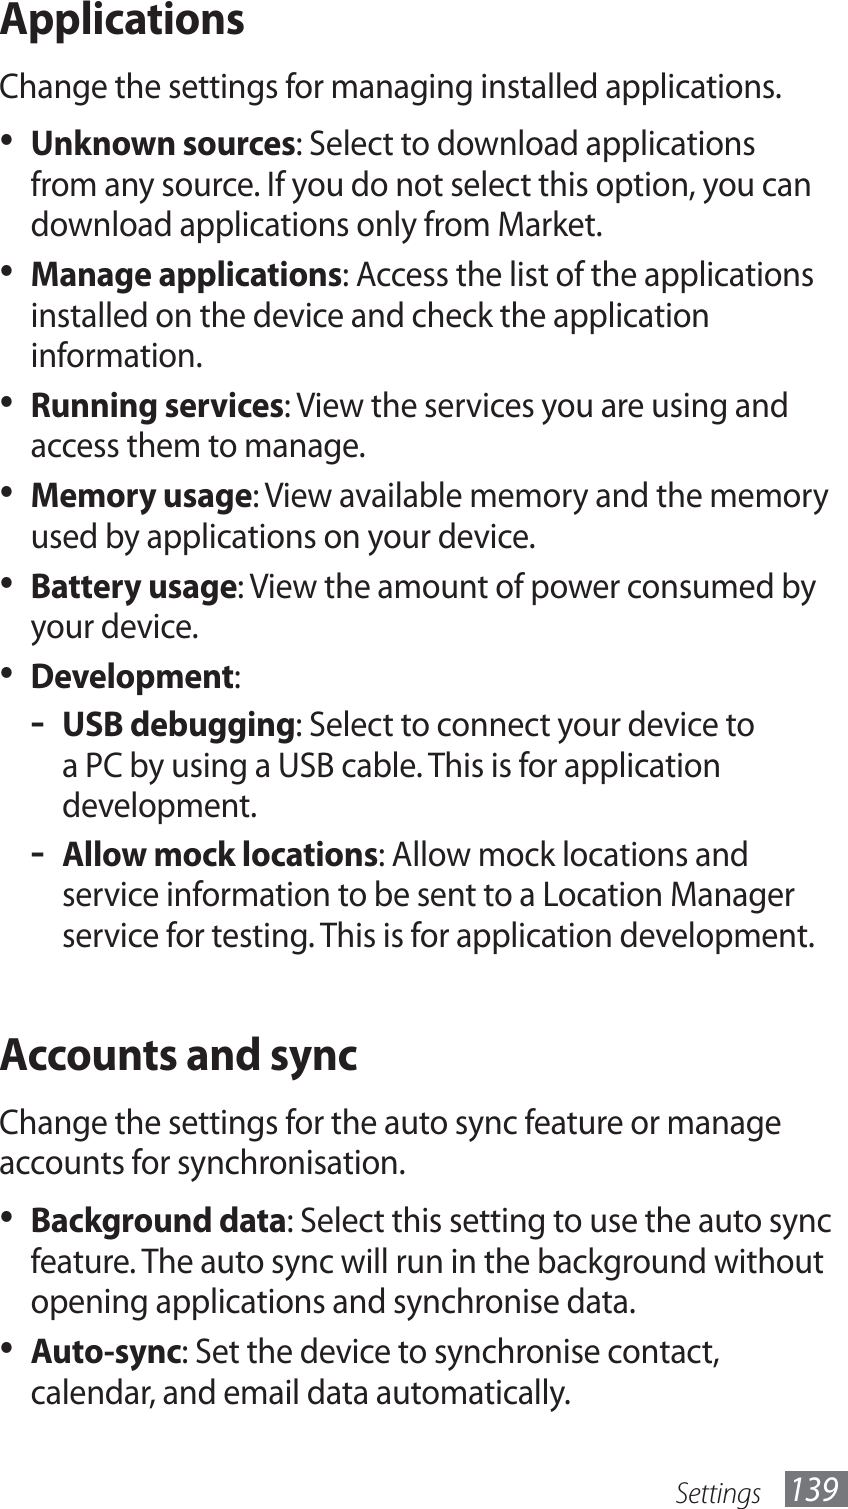 Settings 139ApplicationsChange the settings for managing installed applications.Unknown sources•  : Select to download applications from any source. If you do not select this option, you can download applications only from Market.Manage applications•  : Access the list of the applications installed on the device and check the application information.Running services•  : View the services you are using and access them to manage.Memory usage•  : View available memory and the memory used by applications on your device.Battery usage•  : View the amount of power consumed by your device.Development•  :USB debugging - : Select to connect your device to a PC by using a USB cable. This is for application development.Allow mock locations - : Allow mock locations and service information to be sent to a Location Manager service for testing. This is for application development.Accounts and syncChange the settings for the auto sync feature or manage accounts for synchronisation.Background data•  : Select this setting to use the auto sync feature. The auto sync will run in the background without opening applications and synchronise data.Auto-sync•  : Set the device to synchronise contact, calendar, and email data automatically.